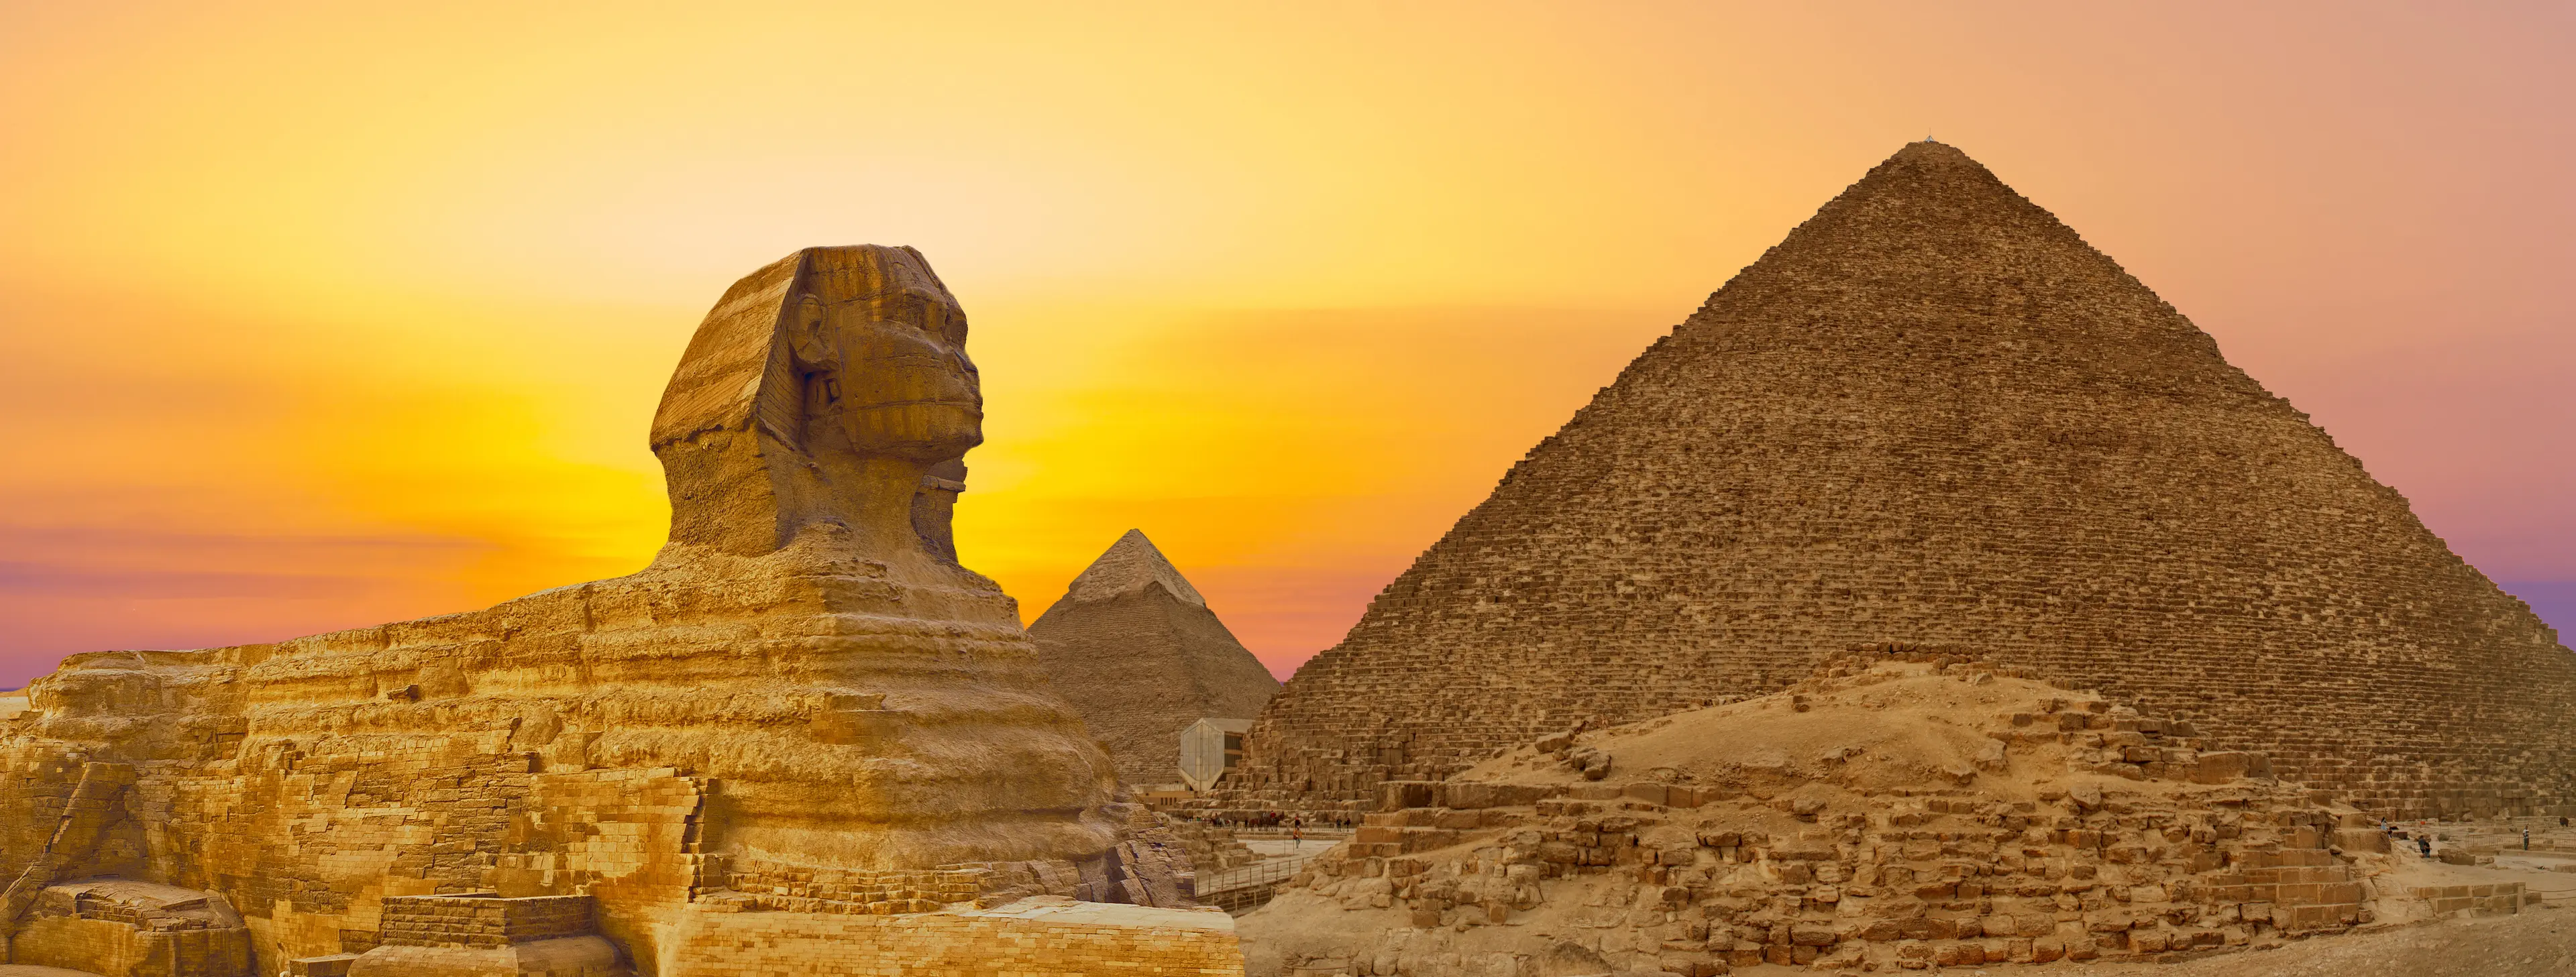 Sphinx and Pyramids of Egypt